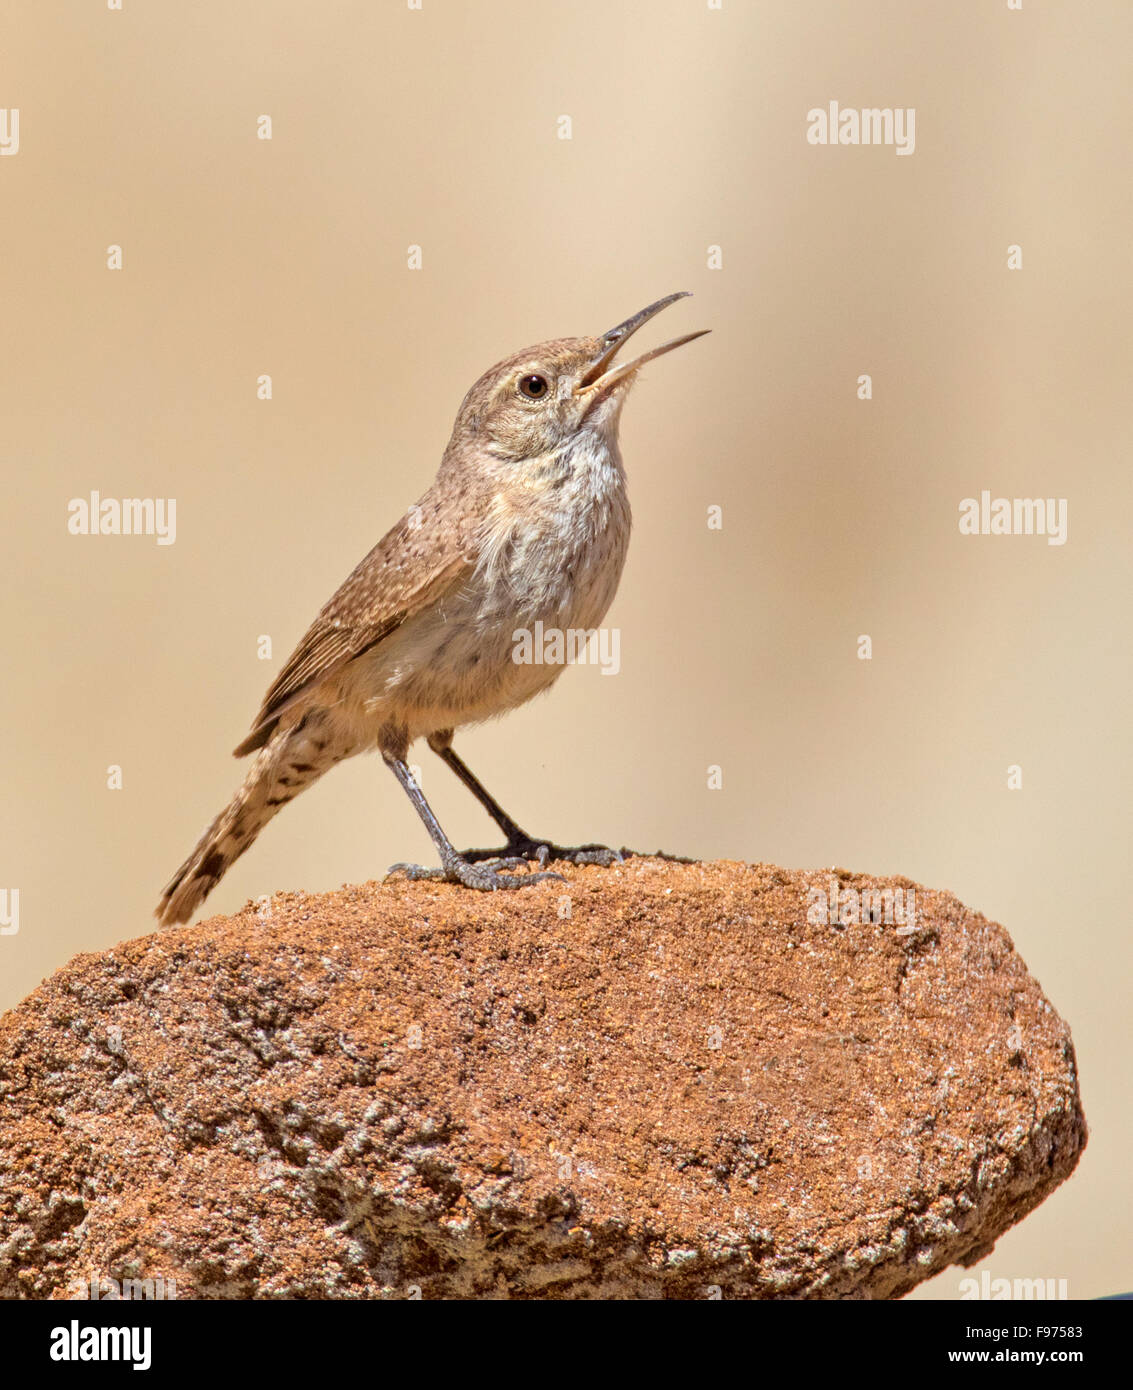 A Rock Wren (Salpinctes obsoletus) perched on a rock in the badlands of North Dakota. Stock Photo